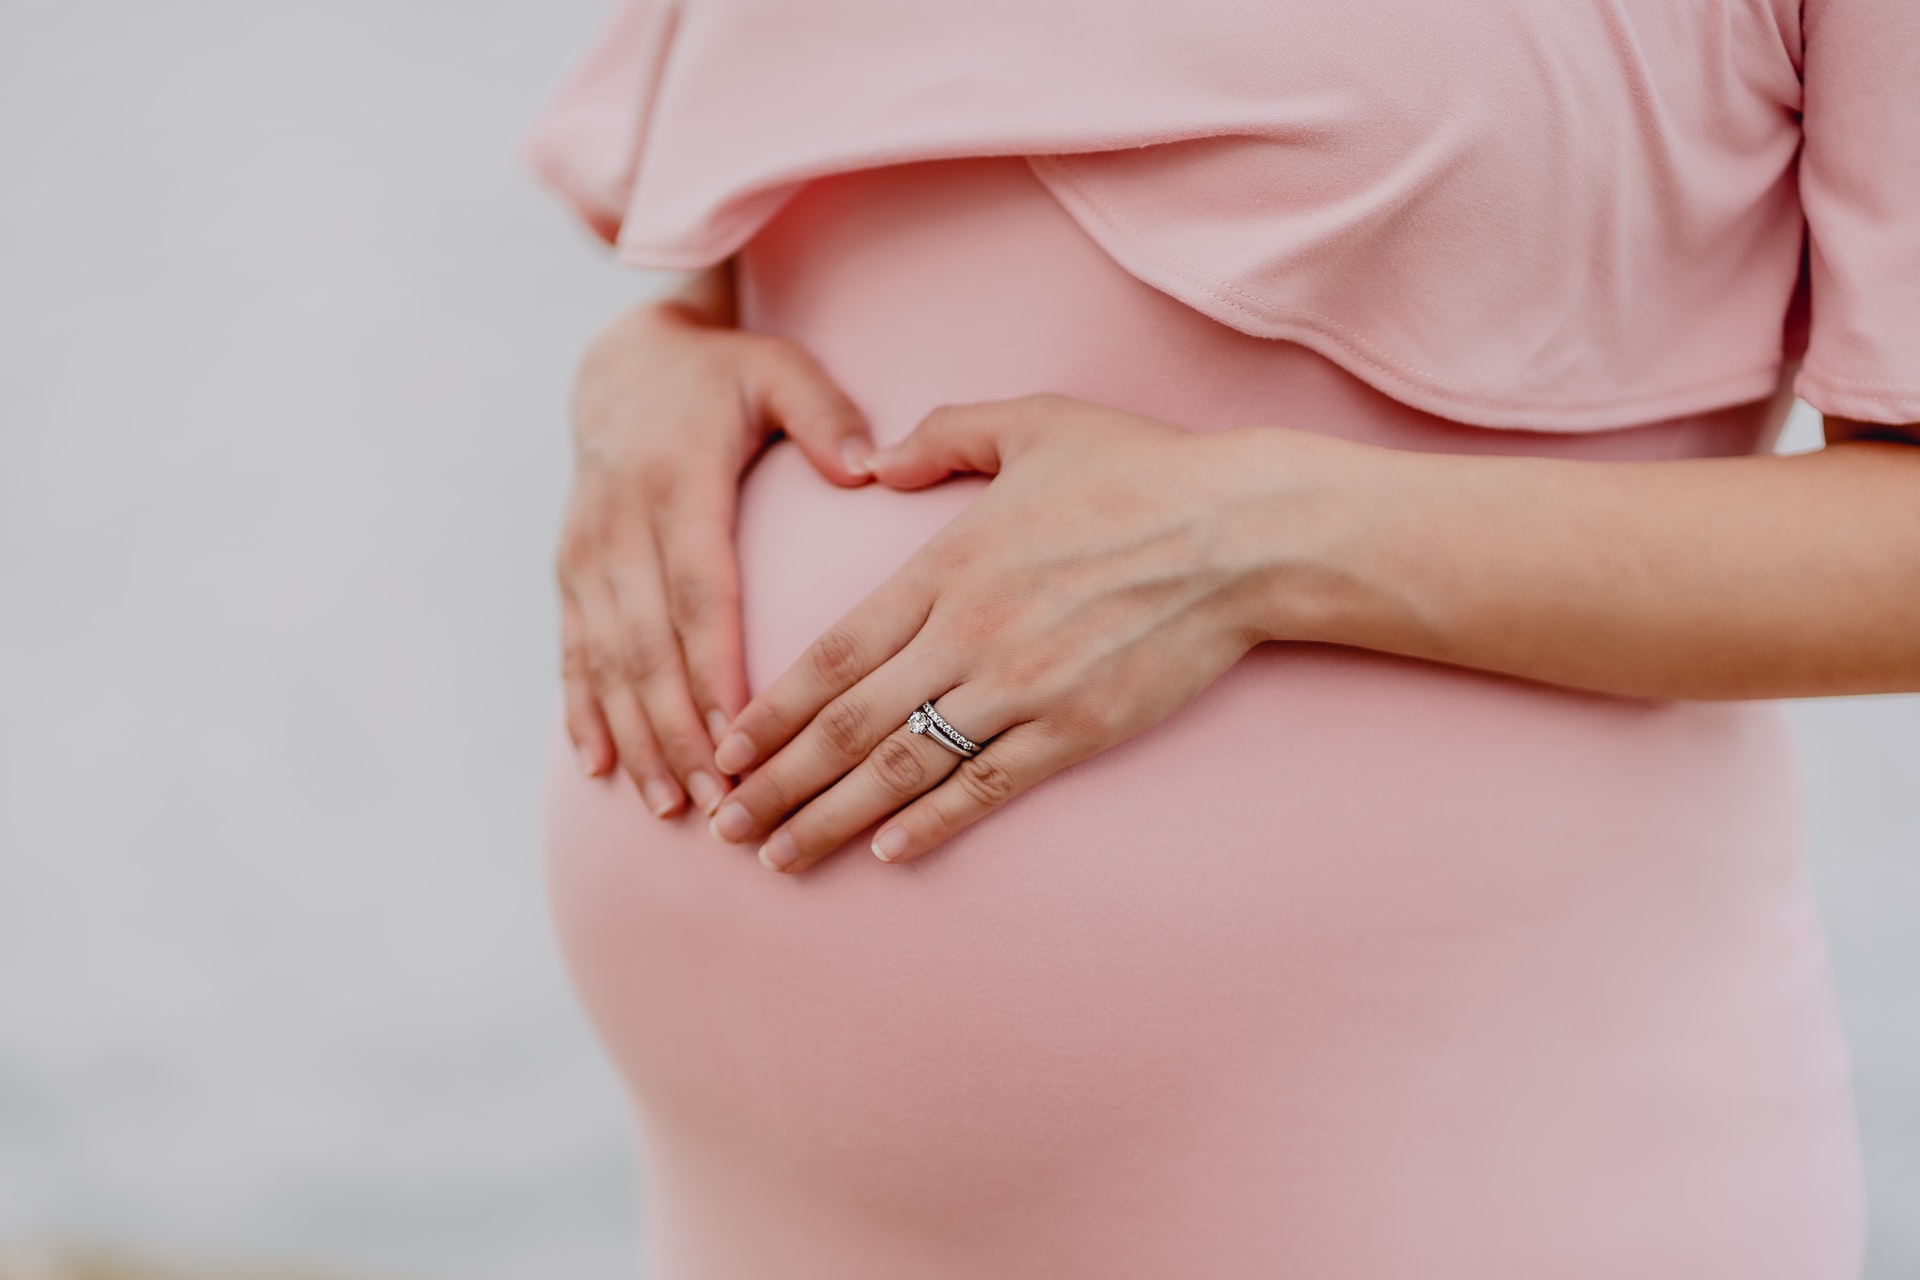 pregnant-woman-wearing-a-pink-dress-holding-her-belly-wearing-a-wedding-ring